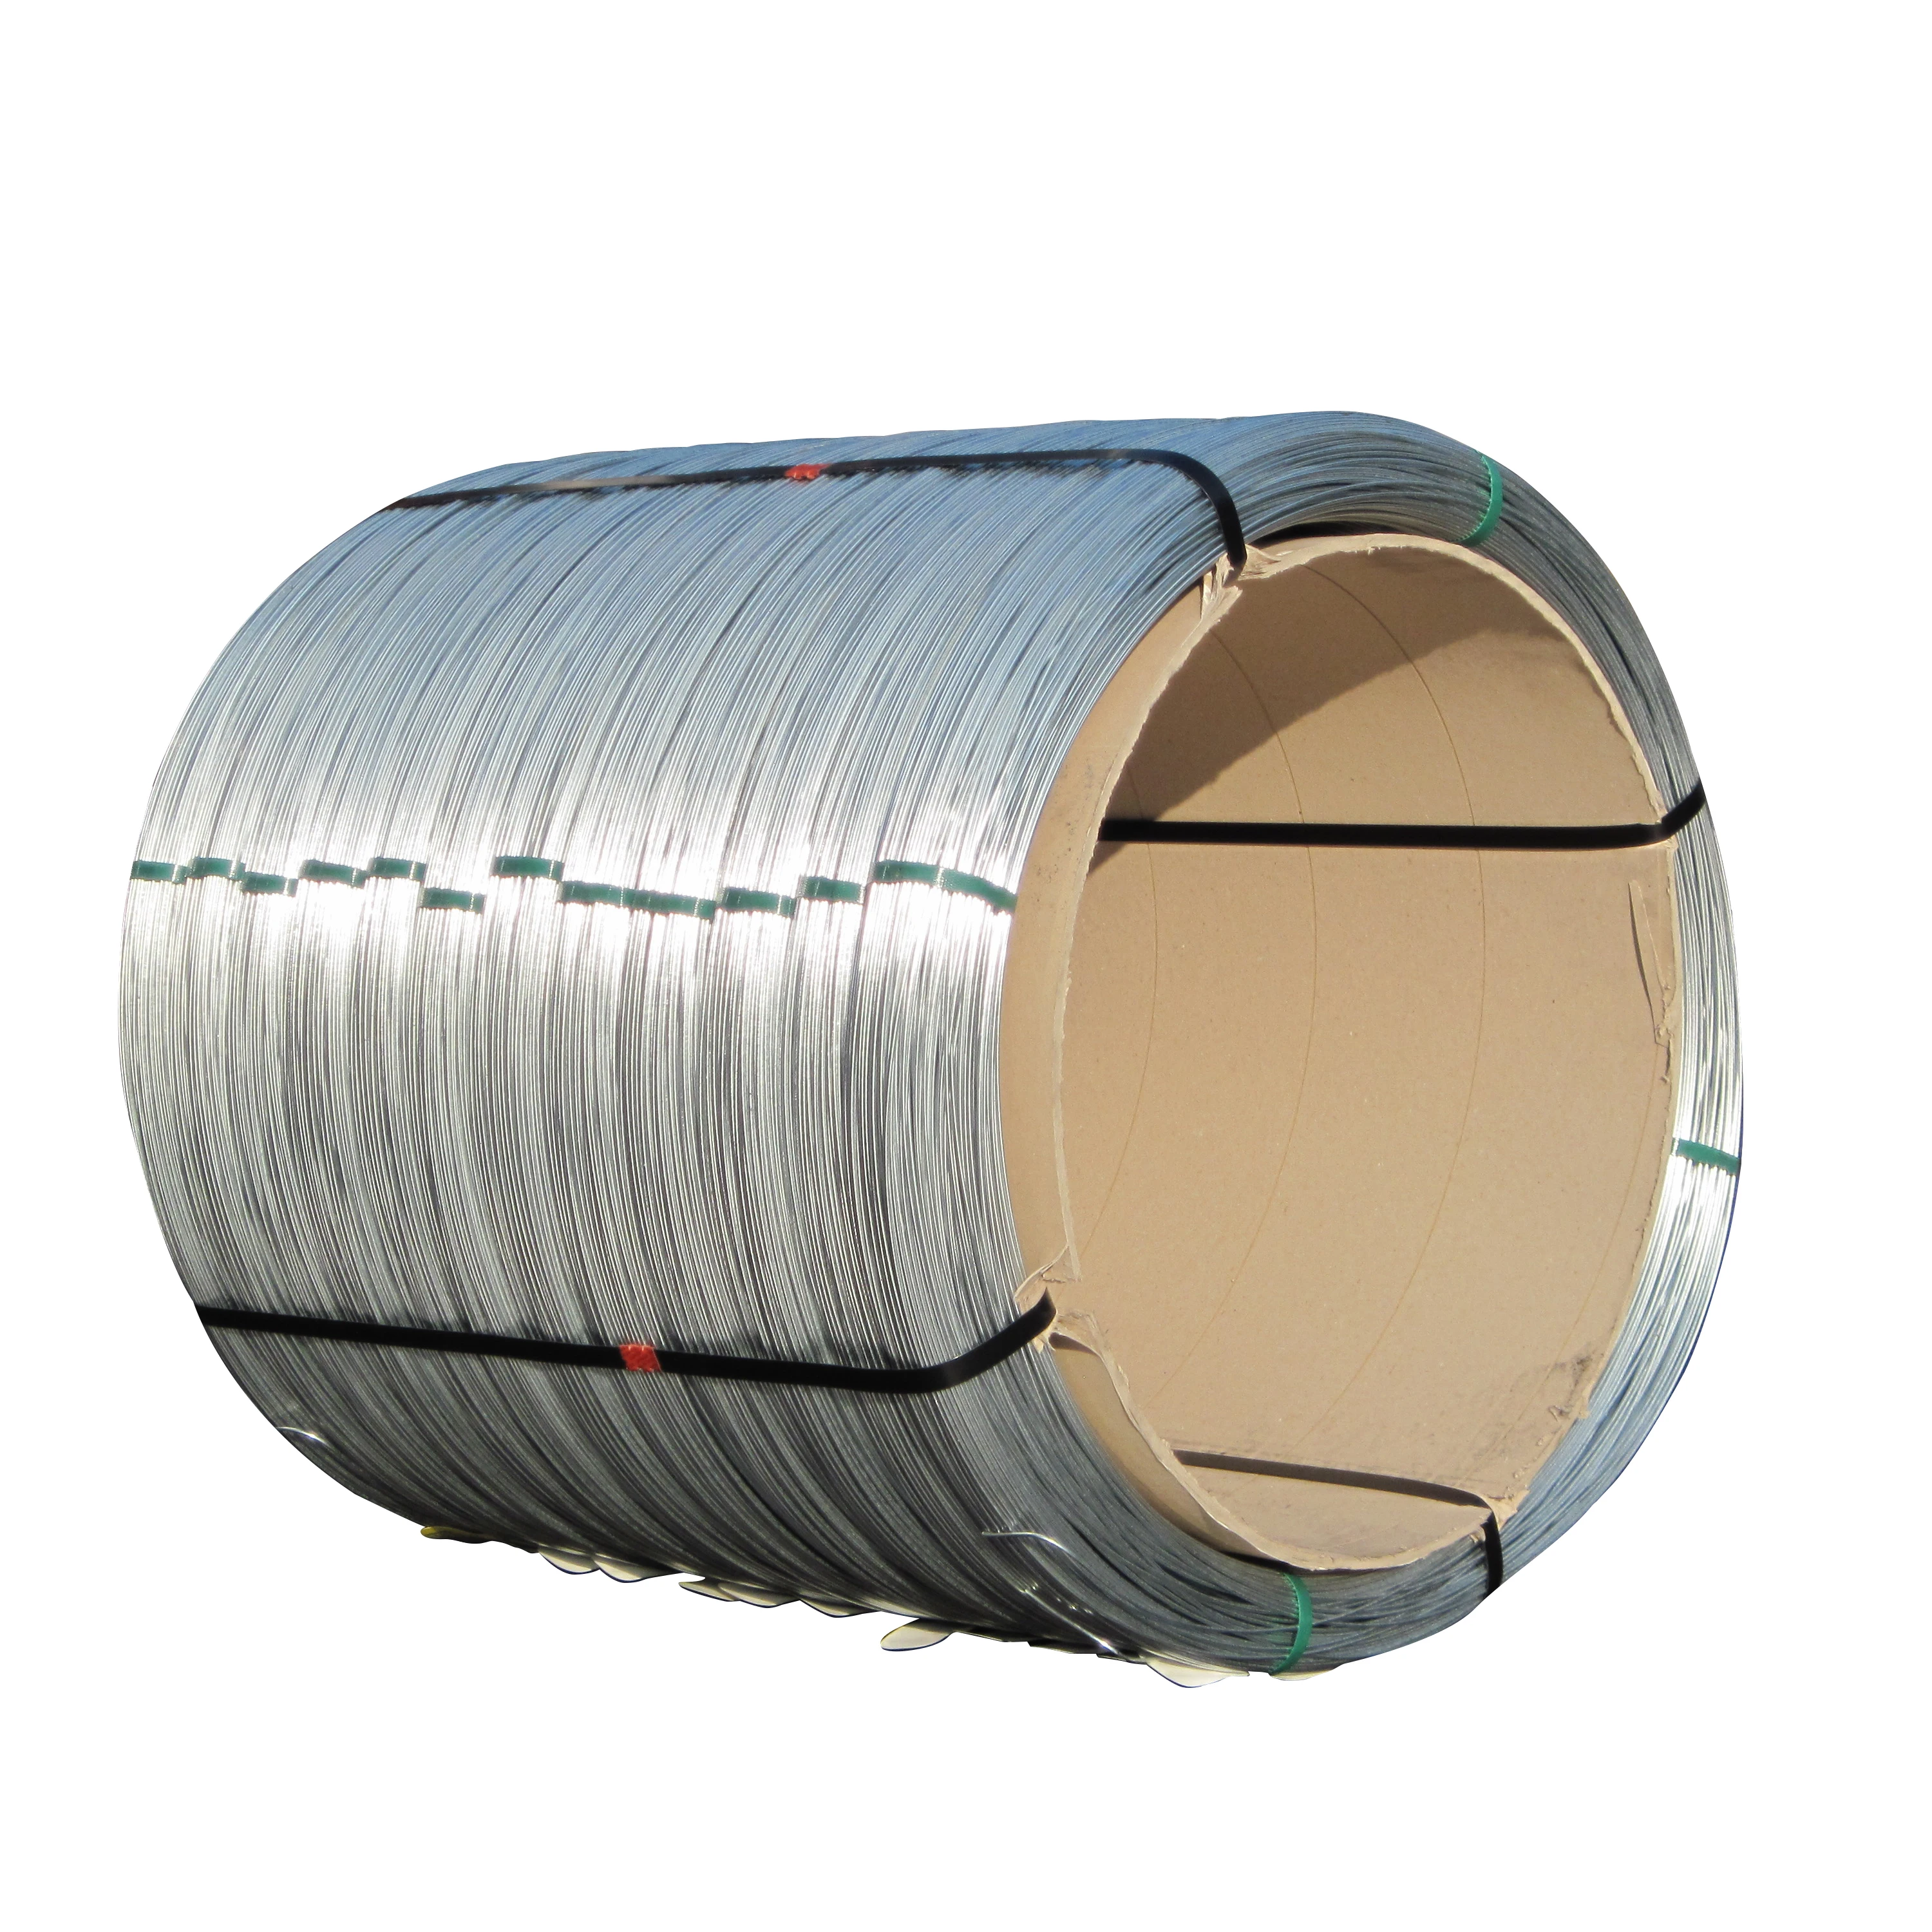 Top quality Italian zinc alu steel wire diam. 2.70 mm for orchards